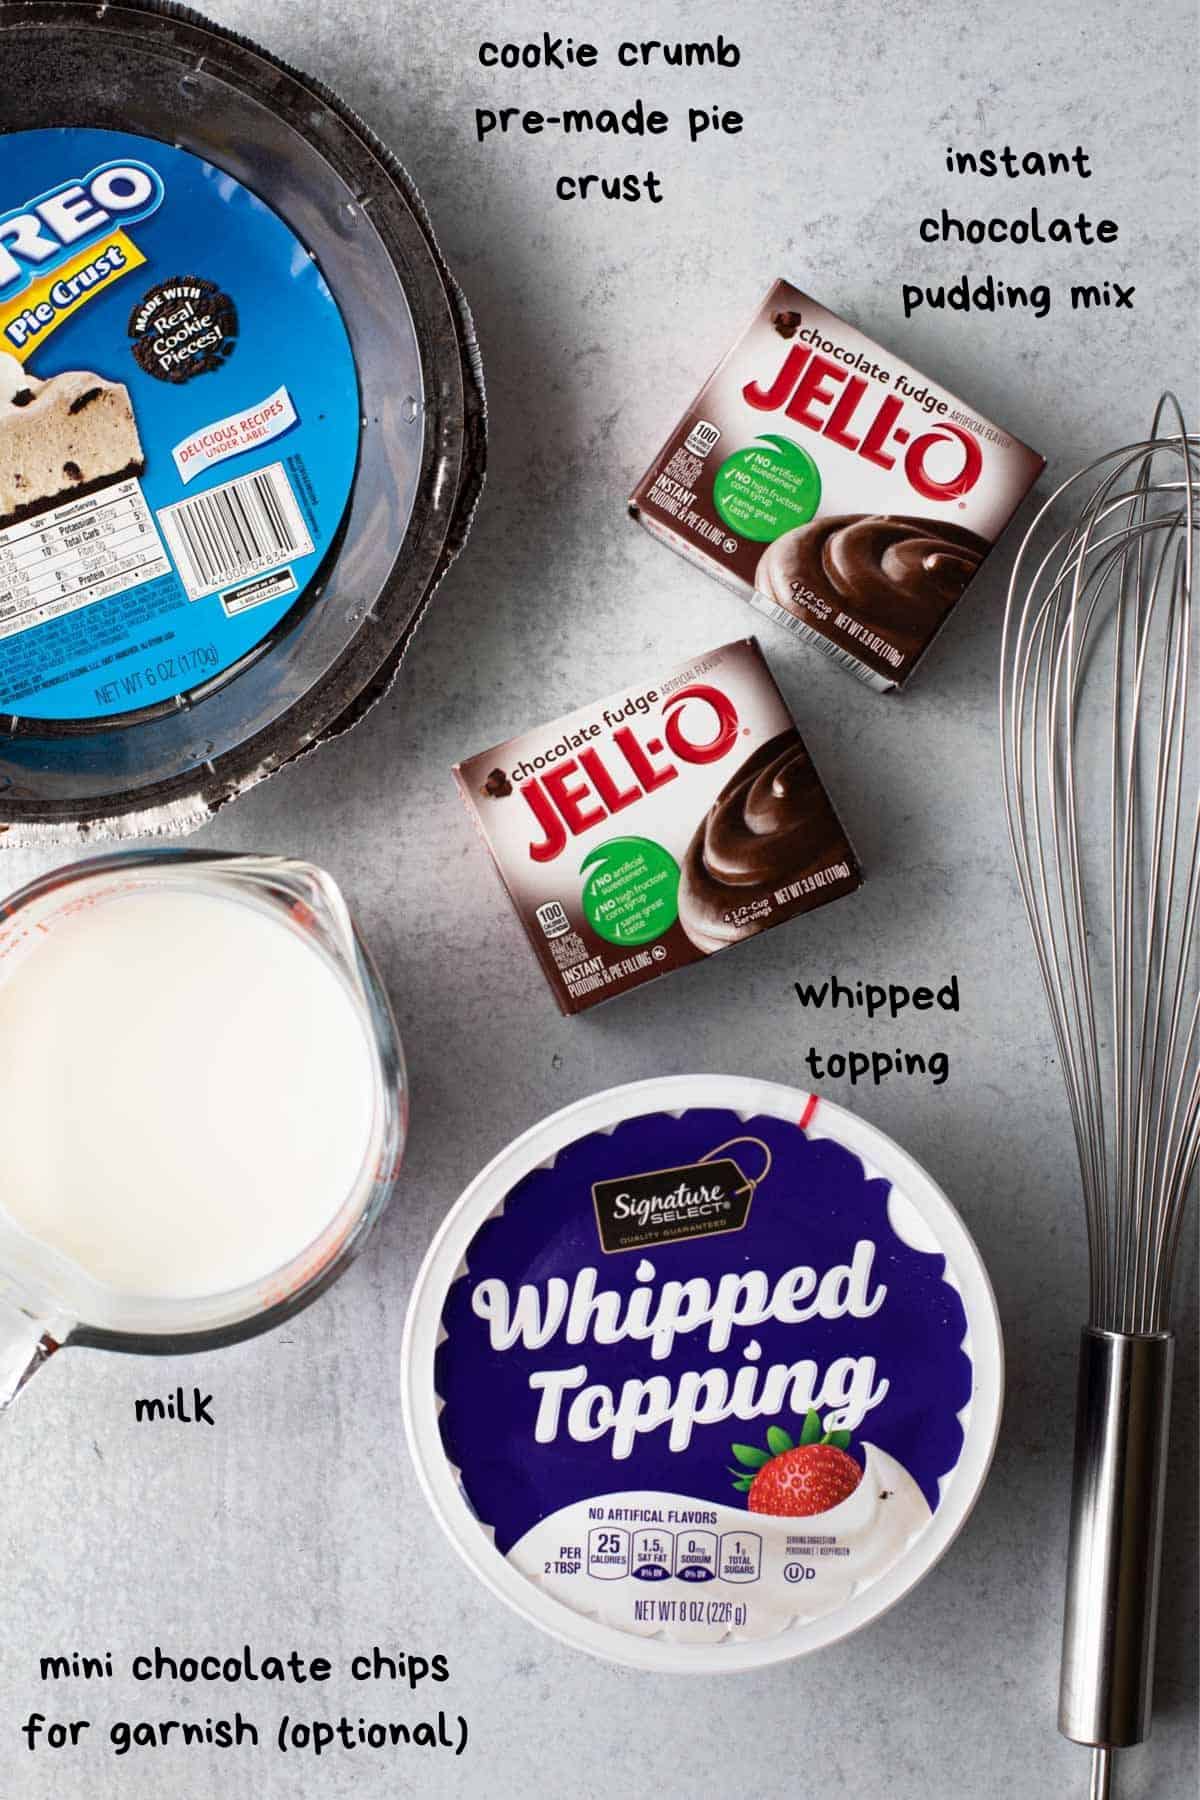 overhead view of recipe ingredients-whipped topping, pudding mix, milk, crust